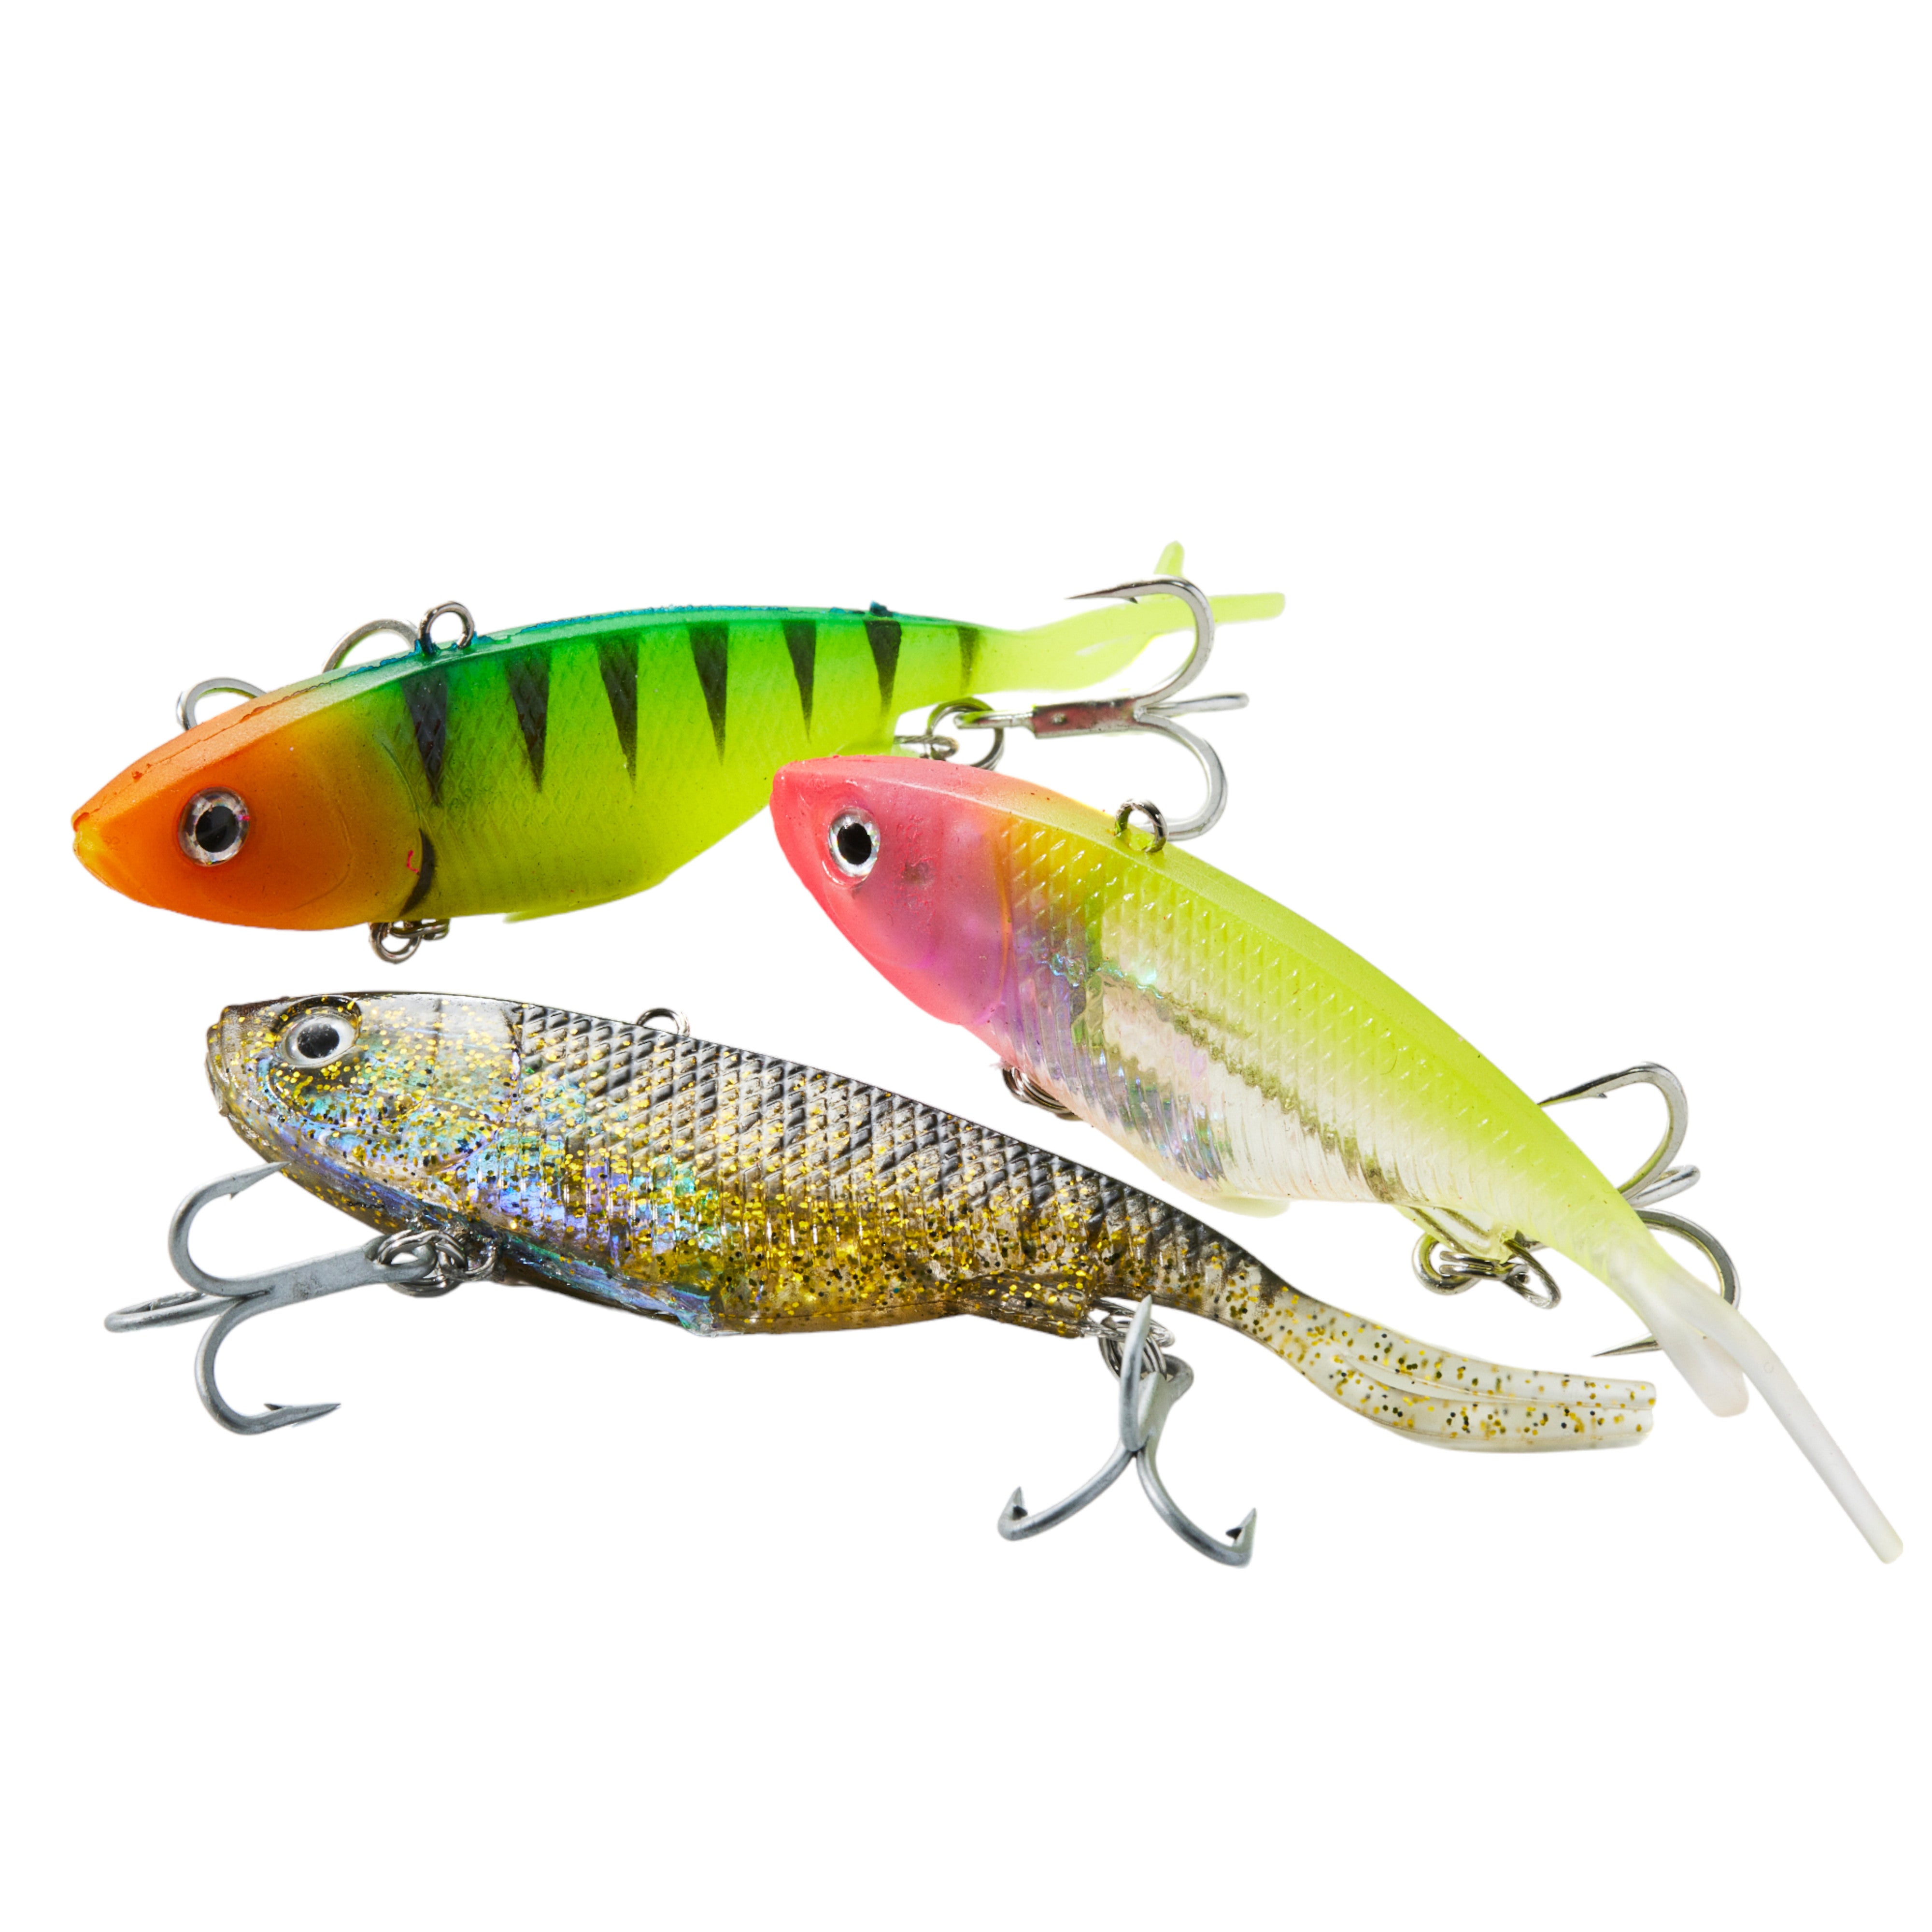 Is a $120 Lure WORTH The Money? 